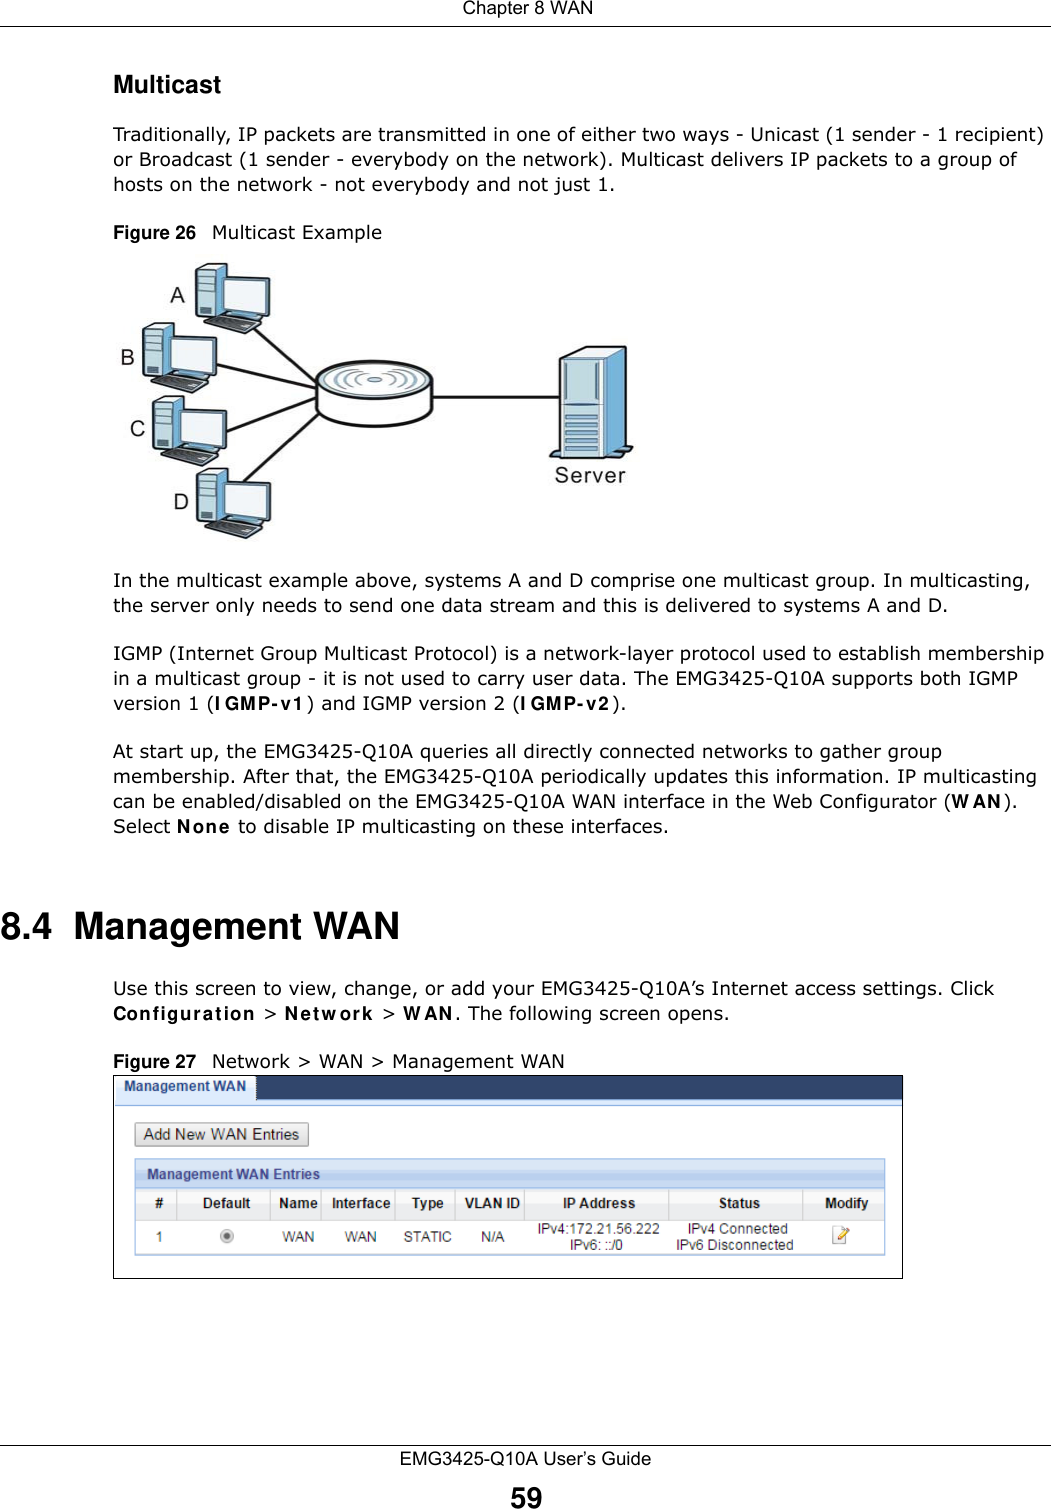  Chapter 8 WANEMG3425-Q10A User’s Guide59MulticastTraditionally, IP packets are transmitted in one of either two ways - Unicast (1 sender - 1 recipient) or Broadcast (1 sender - everybody on the network). Multicast delivers IP packets to a group of hosts on the network - not everybody and not just 1. Figure 26   Multicast ExampleIn the multicast example above, systems A and D comprise one multicast group. In multicasting, the server only needs to send one data stream and this is delivered to systems A and D. IGMP (Internet Group Multicast Protocol) is a network-layer protocol used to establish membership in a multicast group - it is not used to carry user data. The EMG3425-Q10A supports both IGMP version 1 (I GMP- v 1 ) and IGMP version 2 (I GM P- v2 ). At start up, the EMG3425-Q10A queries all directly connected networks to gather group membership. After that, the EMG3425-Q10A periodically updates this information. IP multicasting can be enabled/disabled on the EMG3425-Q10A WAN interface in the Web Configurator (W AN ). Select N one to disable IP multicasting on these interfaces.8.4  Management WANUse this screen to view, change, or add your EMG3425-Q10A’s Internet access settings. Click Configura t ion &gt; N e t w ork  &gt; W AN . The following screen opens.Figure 27   Network &gt; WAN &gt; Management WAN 